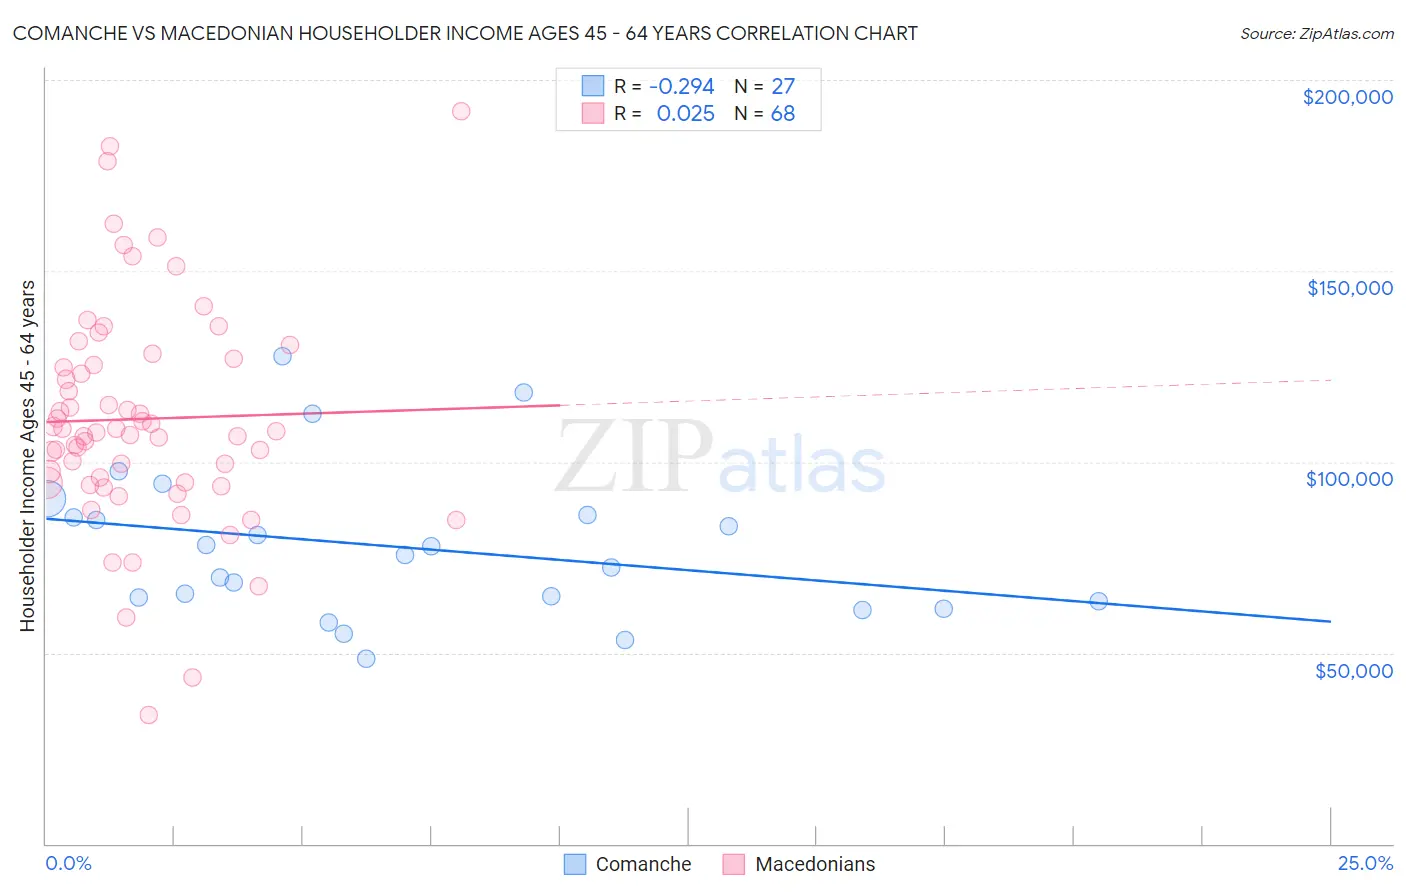 Comanche vs Macedonian Householder Income Ages 45 - 64 years